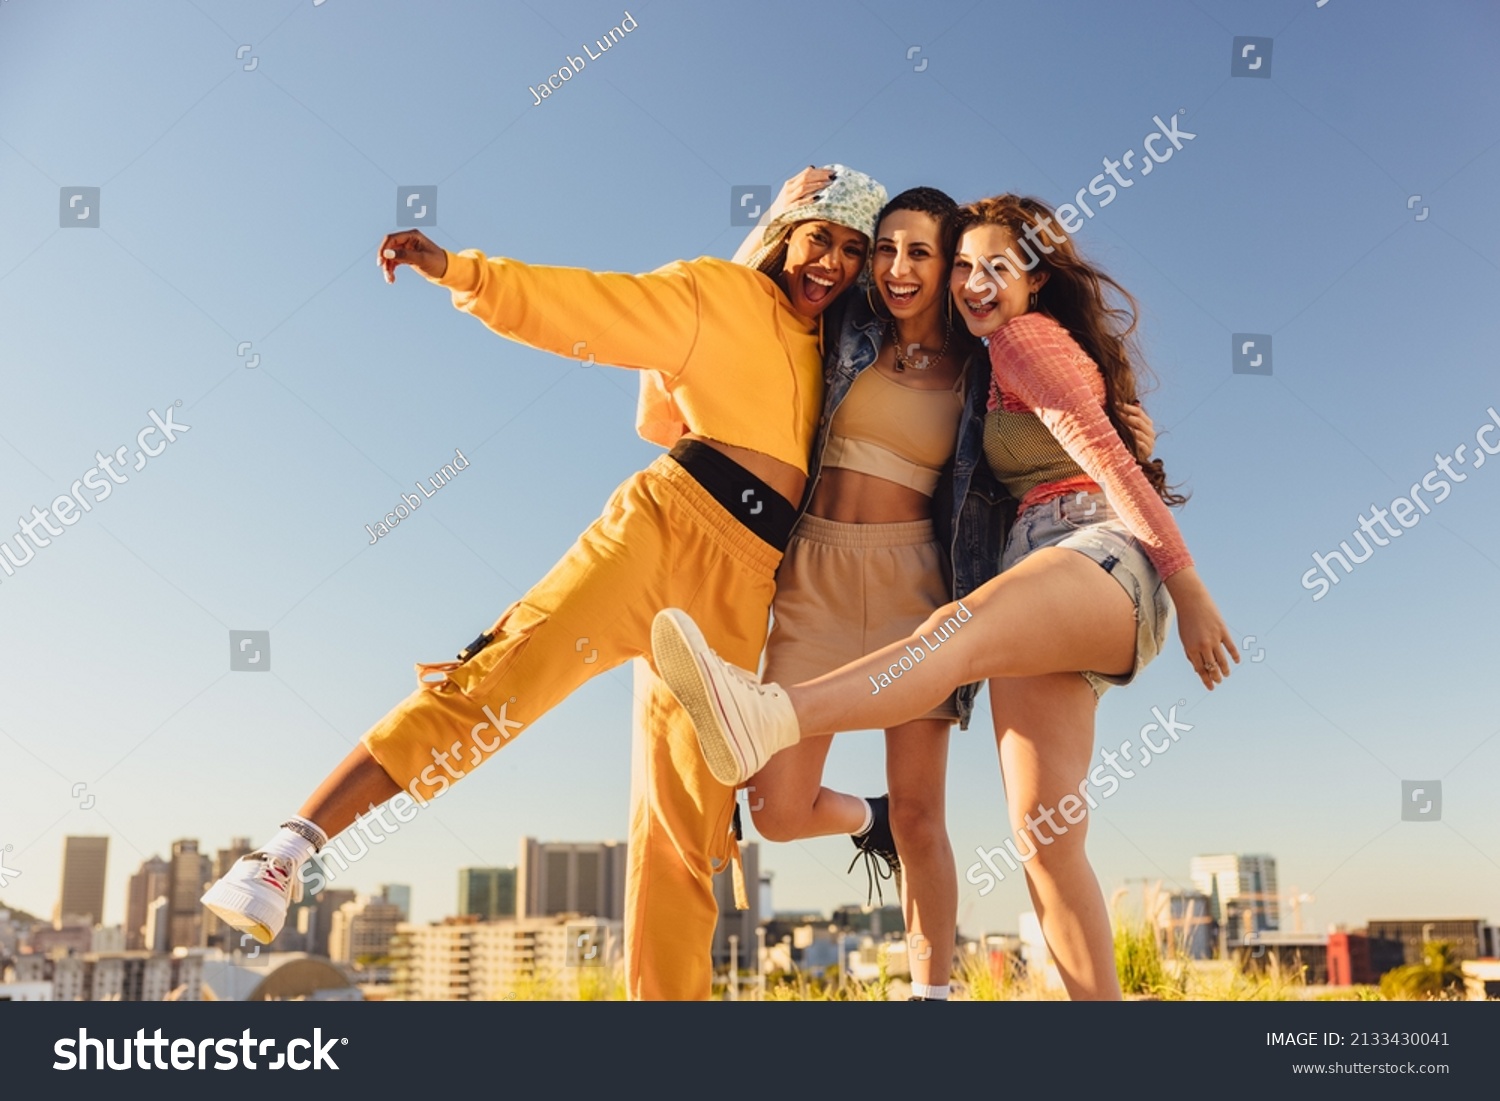 Living life to the fullest. Cheerful female youngsters smiling and having fun while standing together outdoors. Group of generation z friends making happy memories together. #2133430041